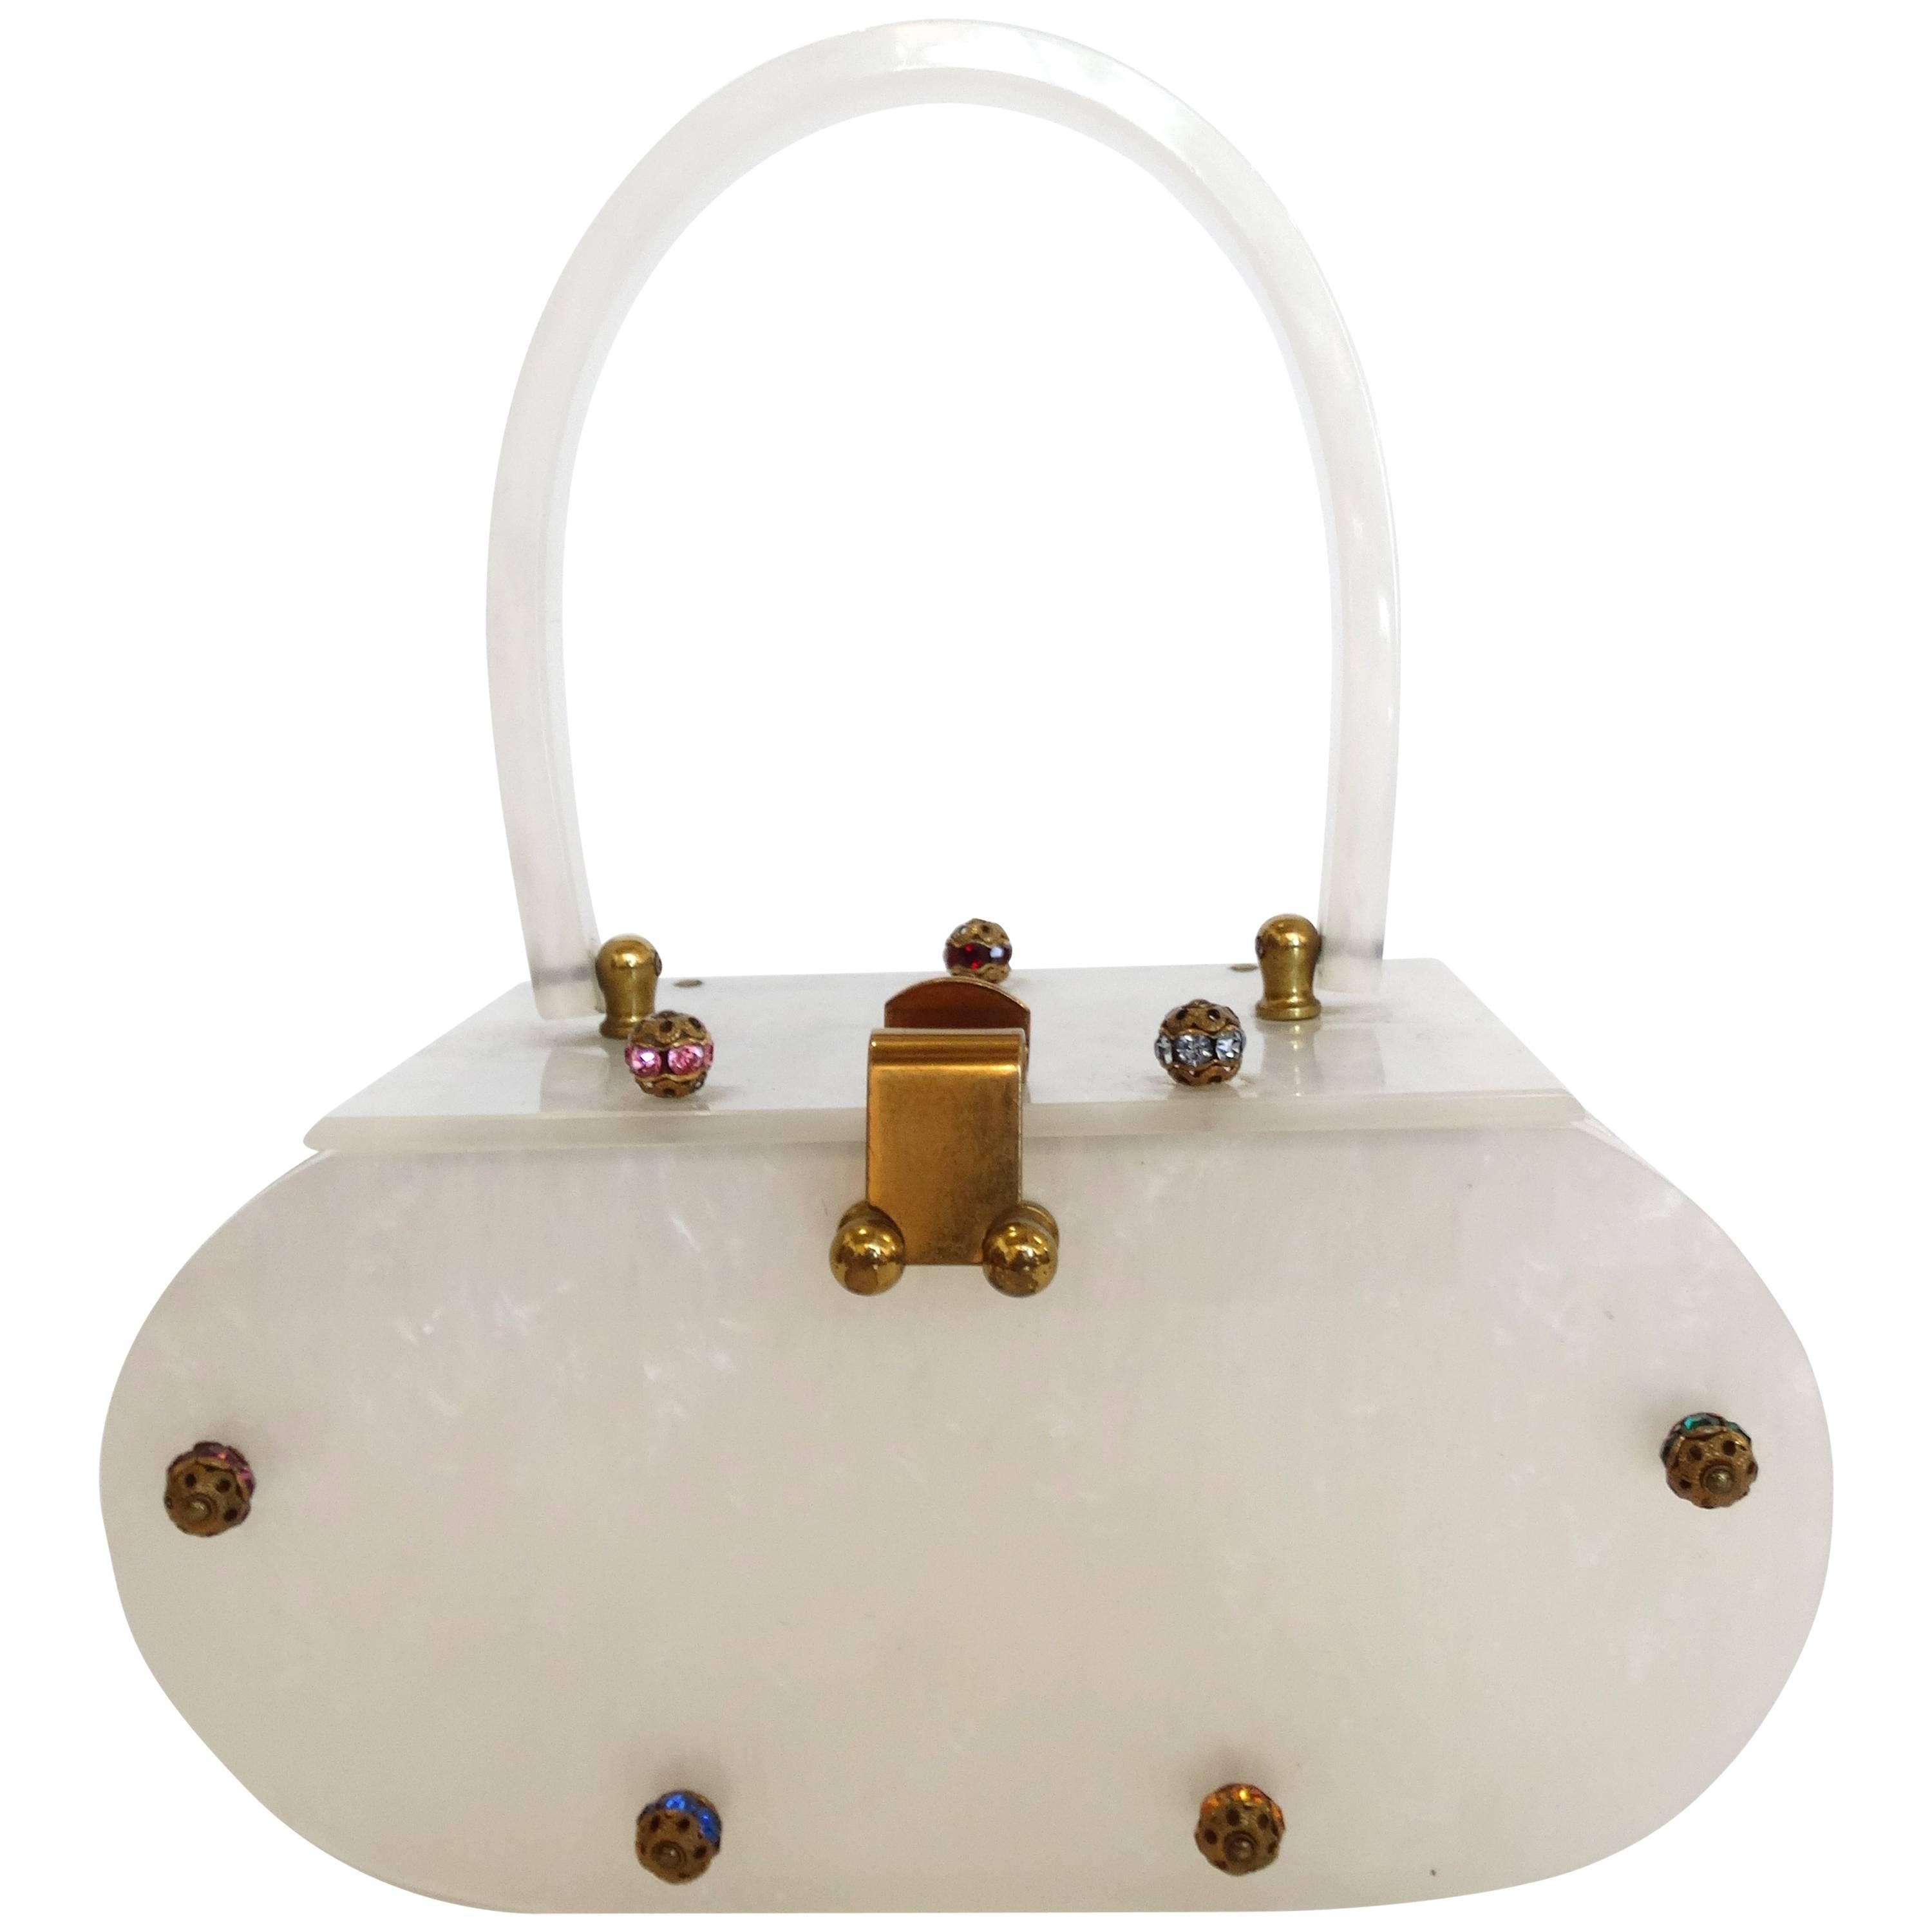 Rare 1960s Lucite Evening Bag With Jewel Accents